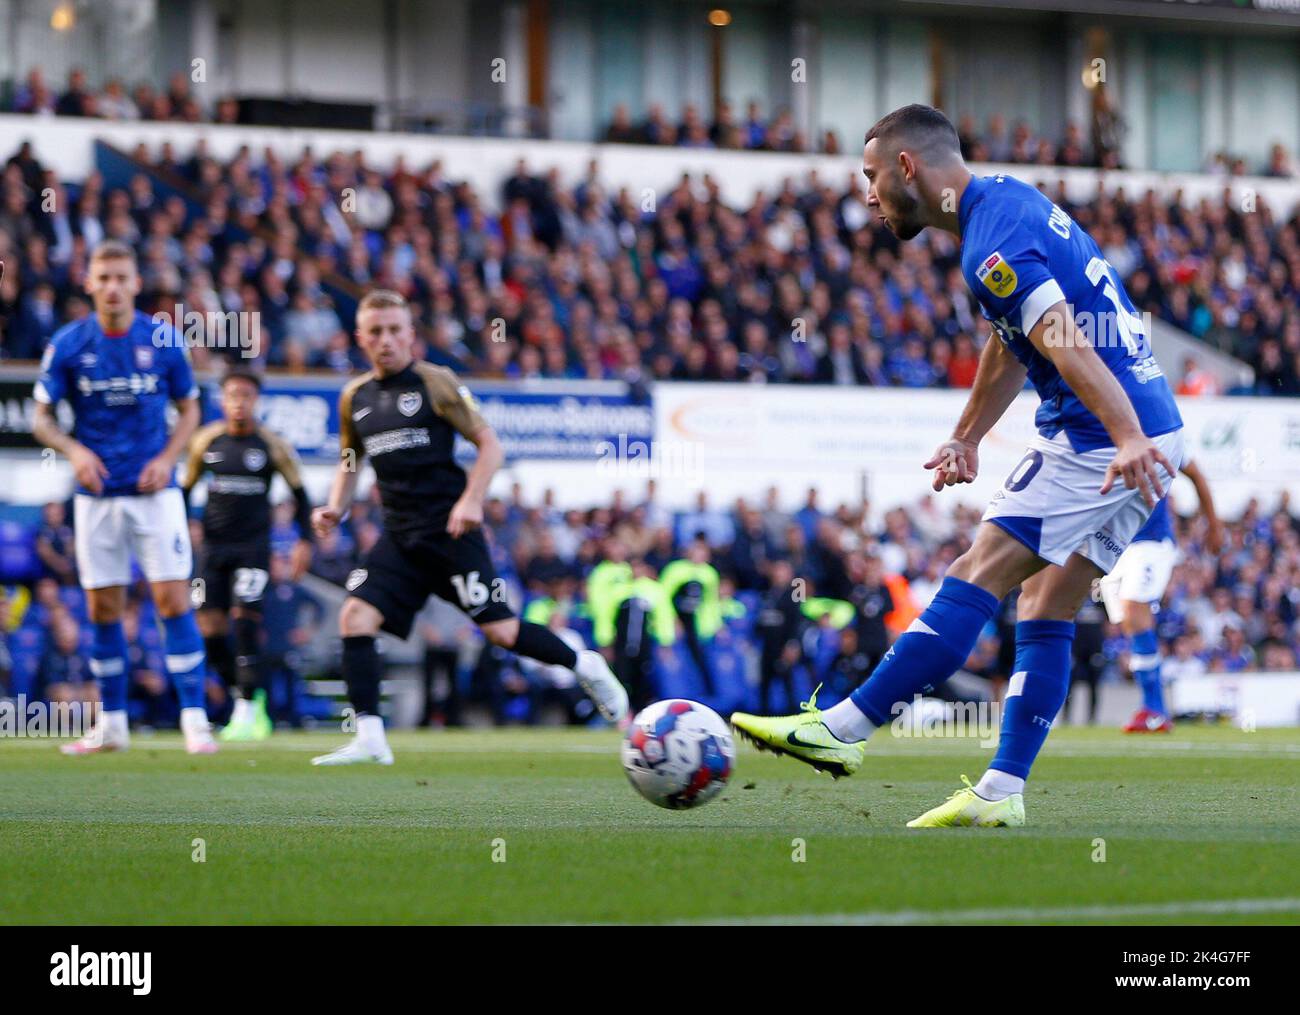 Ipswich, UK. 01st Oct, 2022. Conor Chaplin of Ipswich Town takes a shot at goal during the Sky Bet League One match between Ipswich Town and Portsmouth at Portman Road on October 1st 2022 in Ipswich, England. (Photo by Mick Kearns/phcimages.com) Credit: PHC Images/Alamy Live News Stock Photo